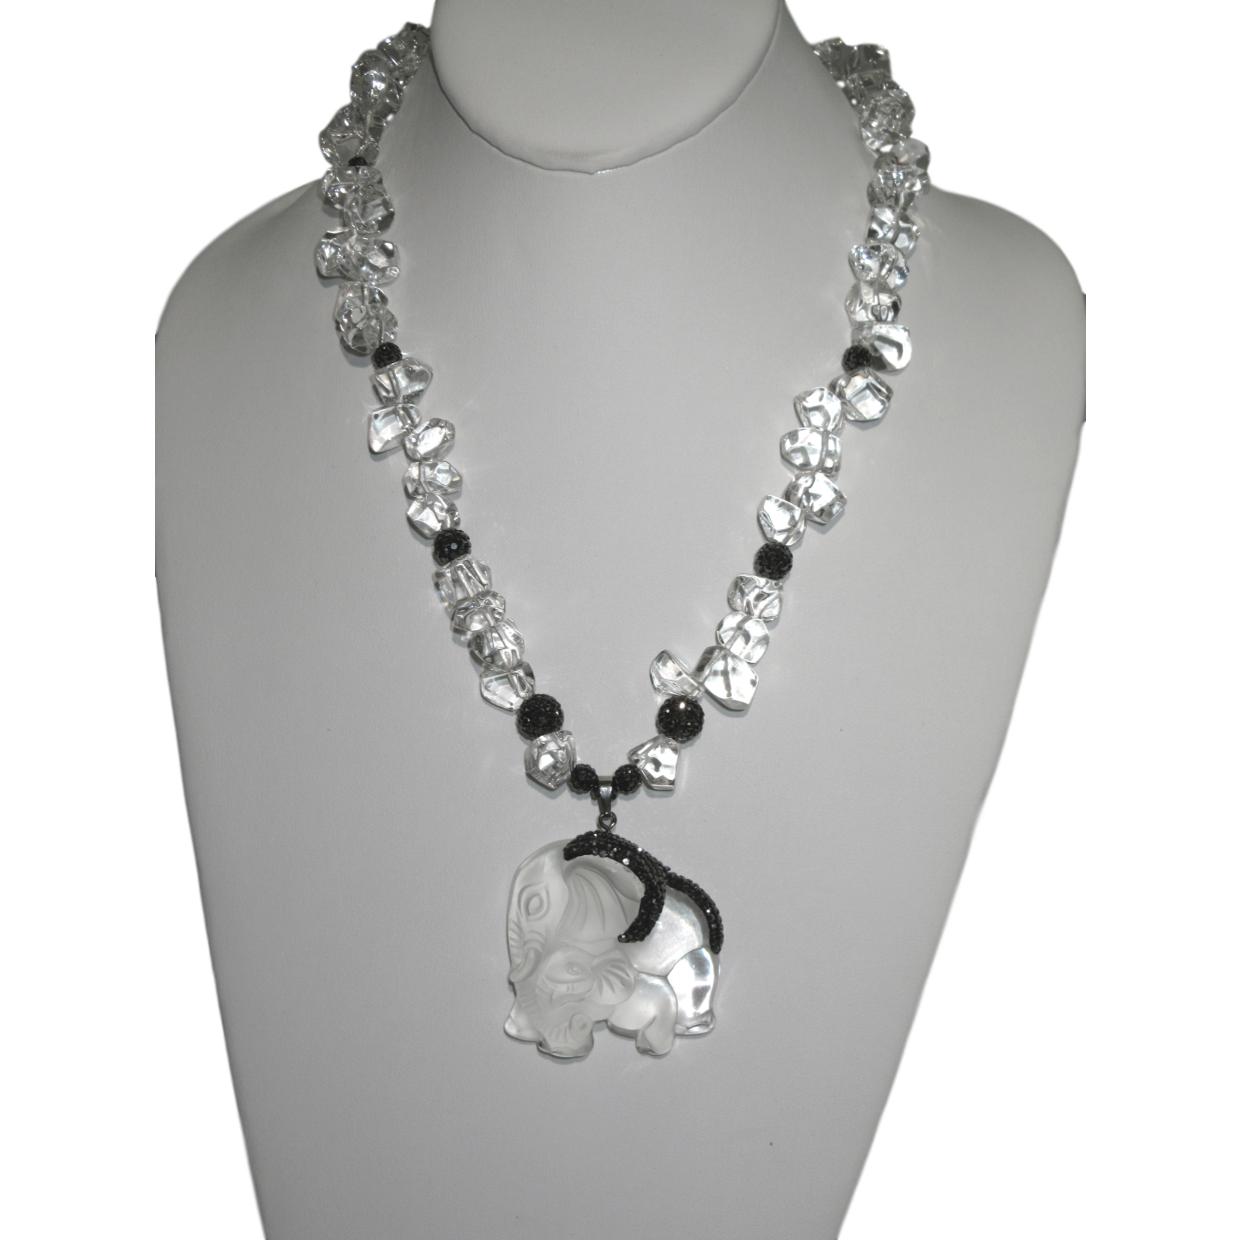 Rock Crystal with Hemotite Crystal Accents Necklace By Marti Rosenburgh